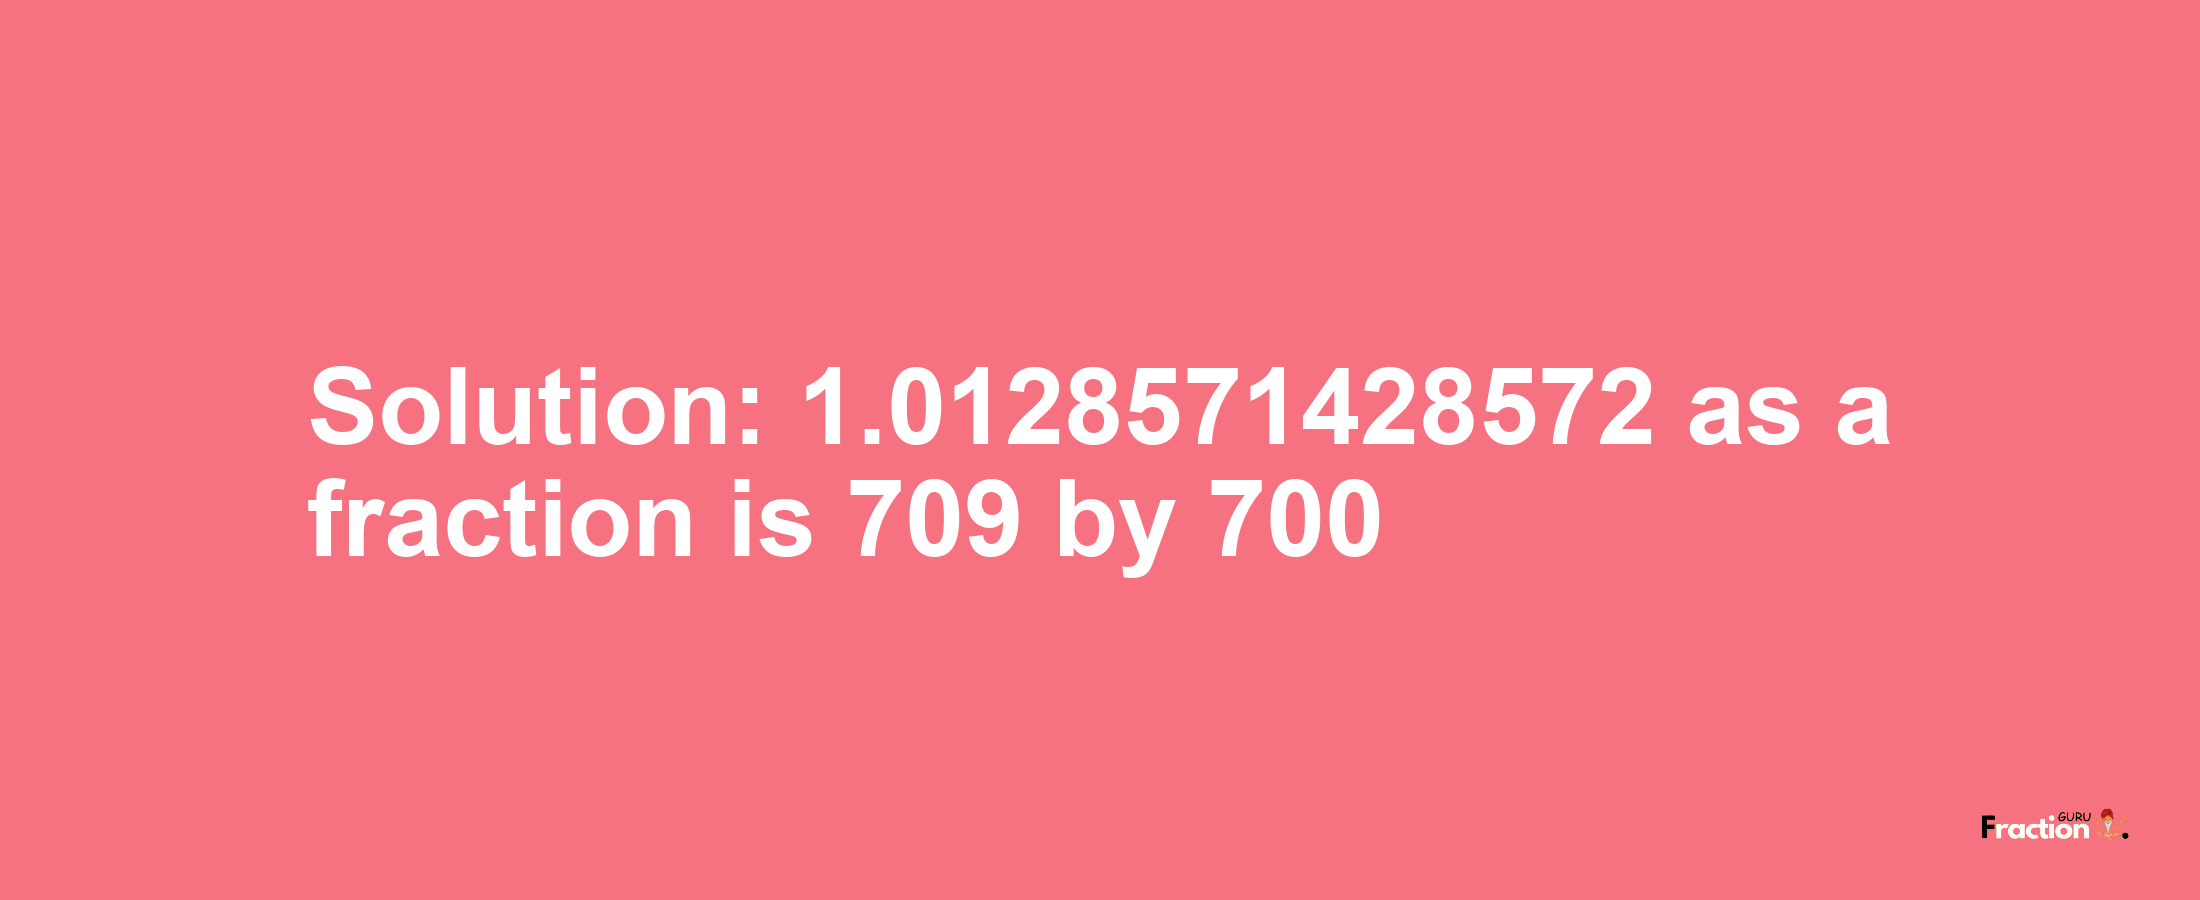 Solution:1.0128571428572 as a fraction is 709/700